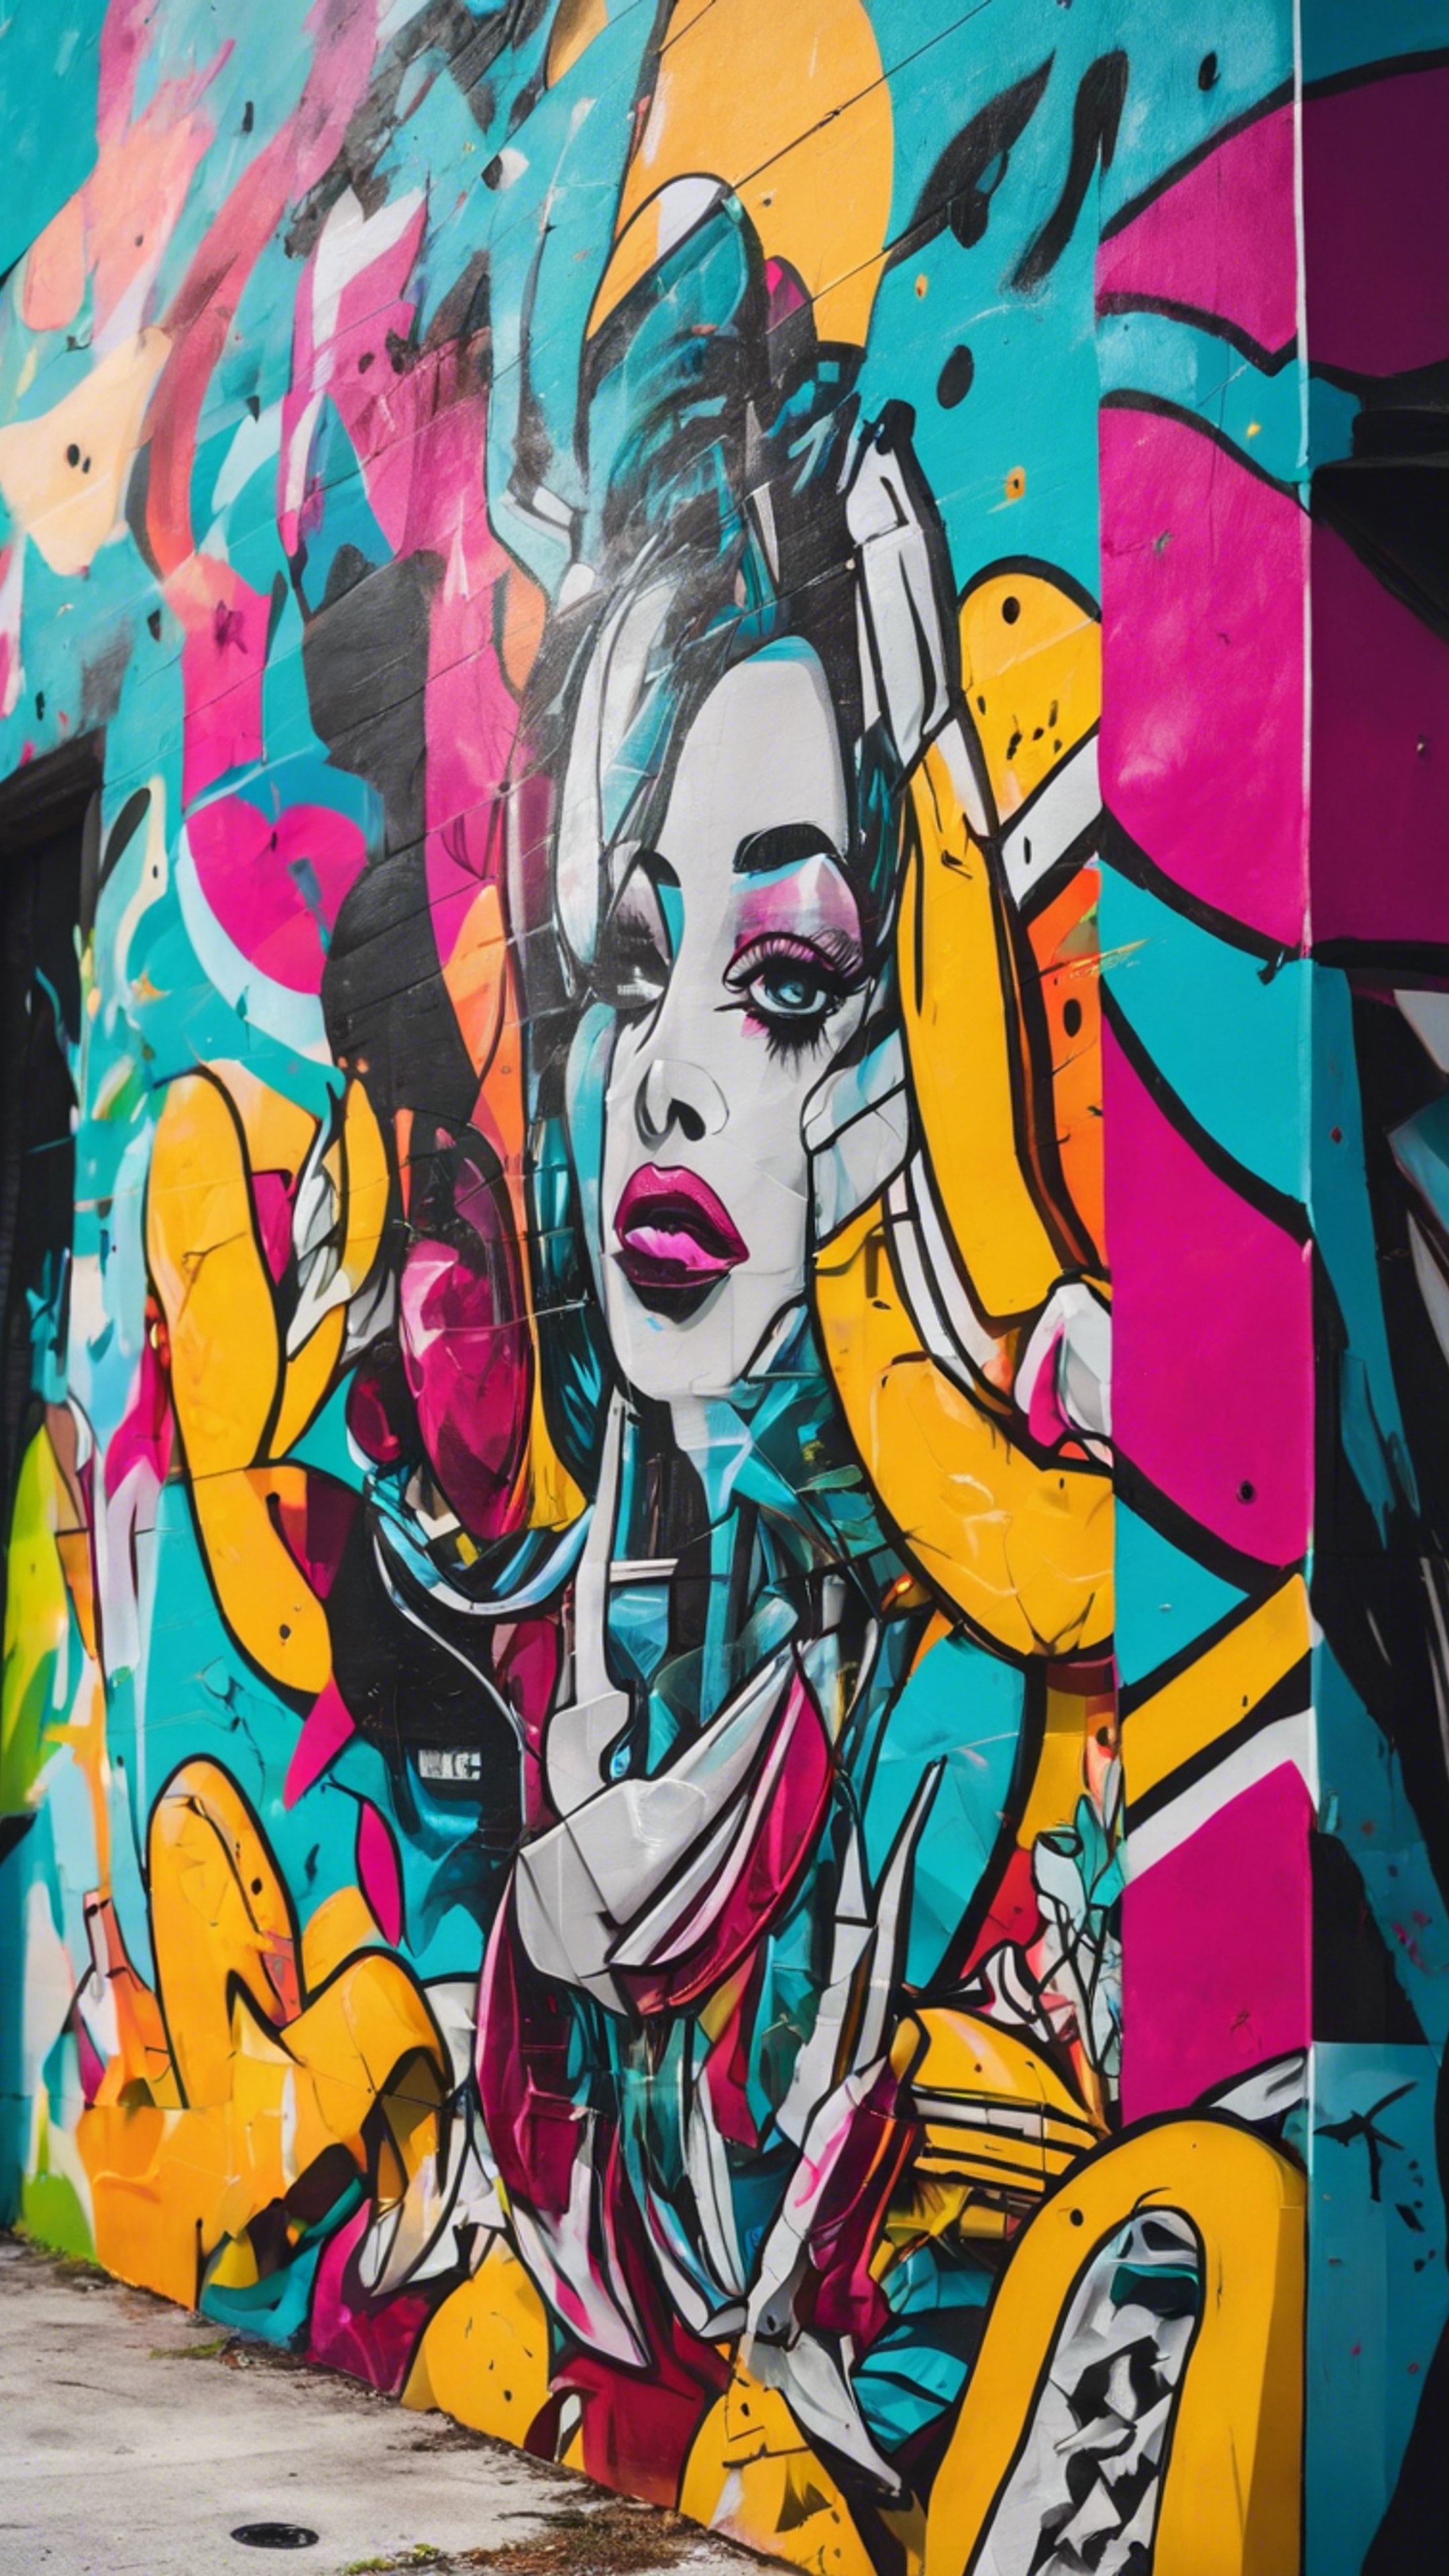 A vibrant street art mural in Wynwood, Miami, featuring abstract art and bright colors. Тапет[fc74442468964623923a]